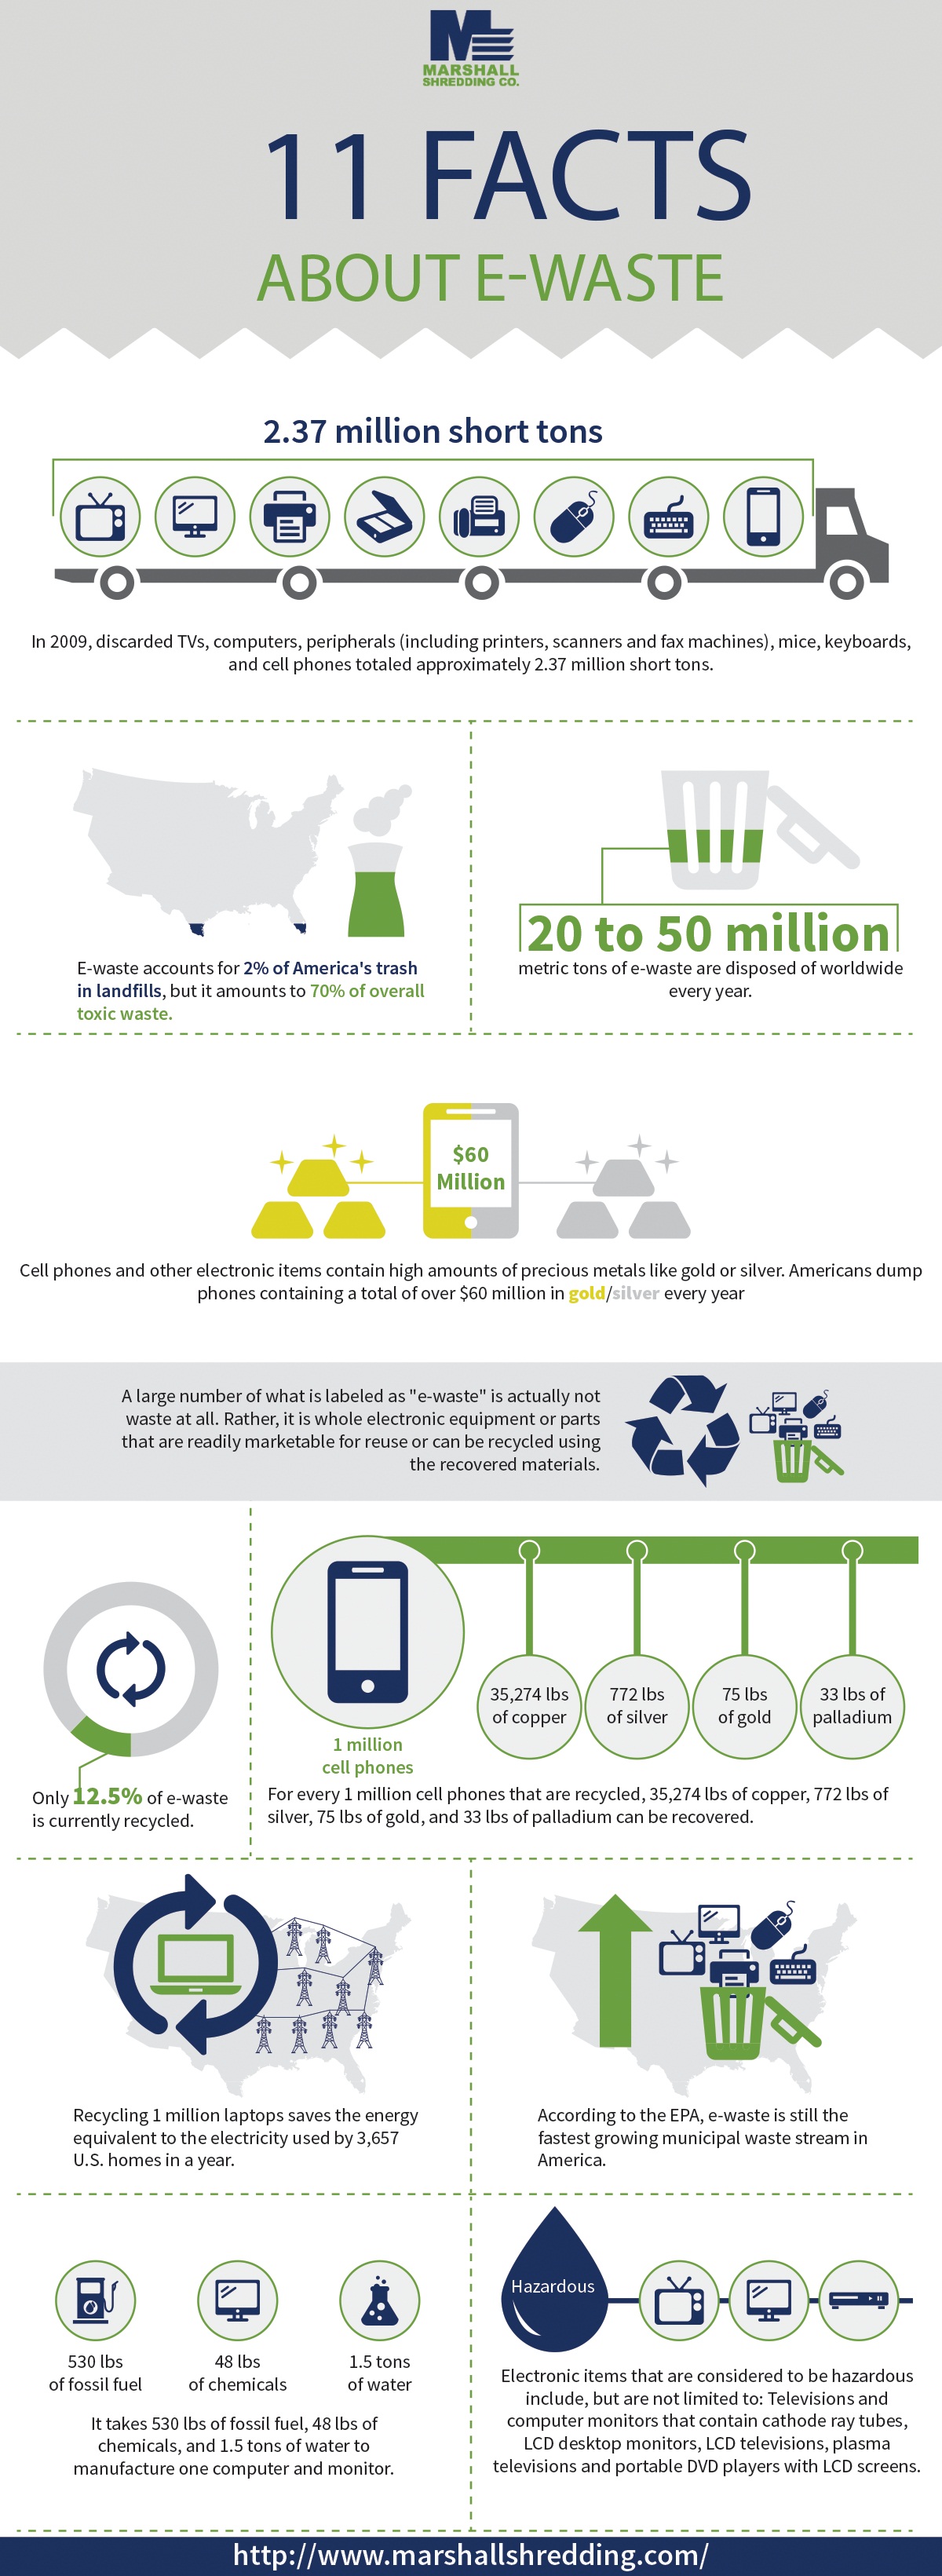 11 Facts About E-Waste